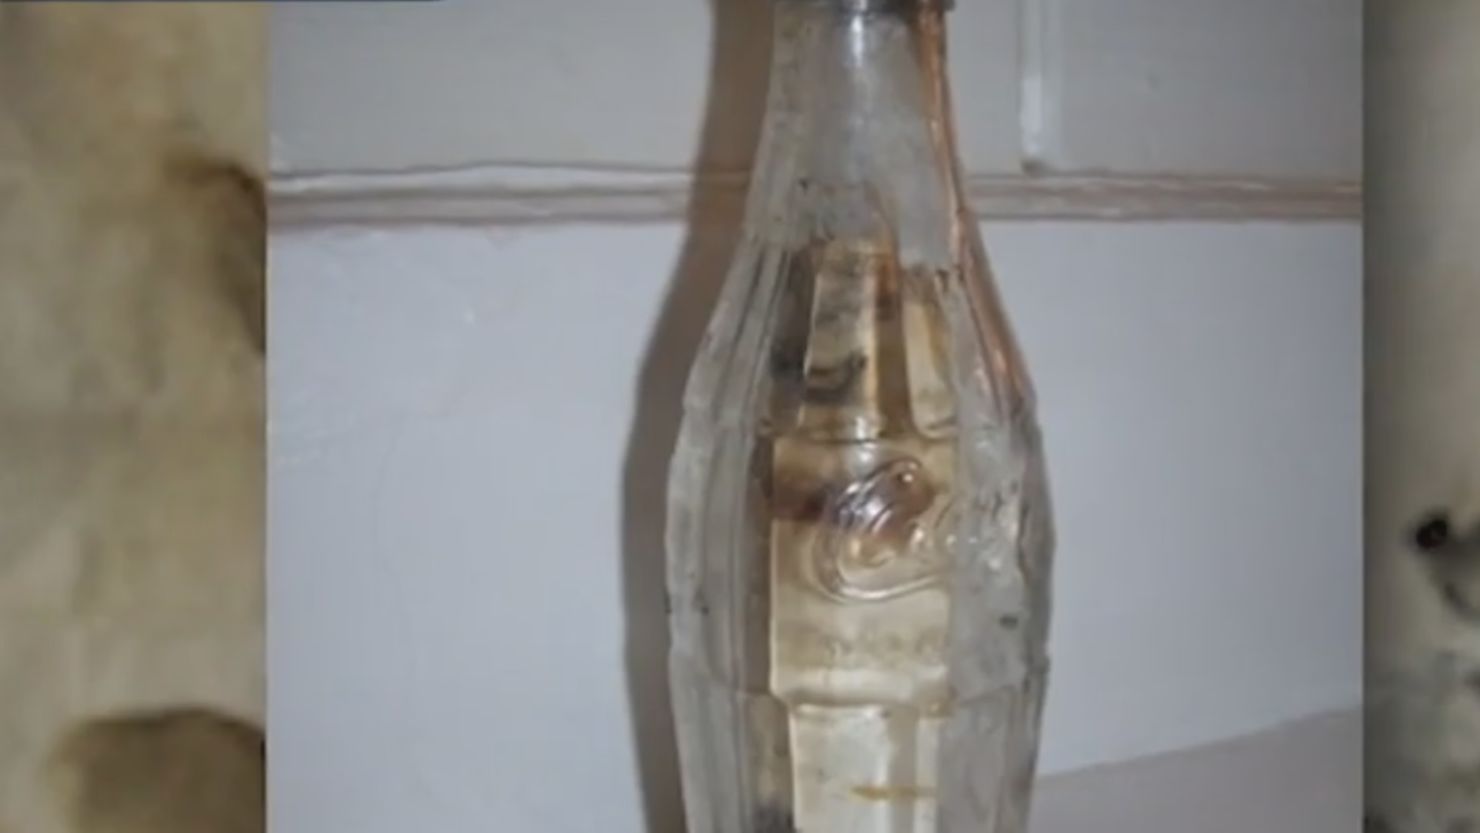 The bottle traveled about 1,500 miles to the Turks and Caicos islands.